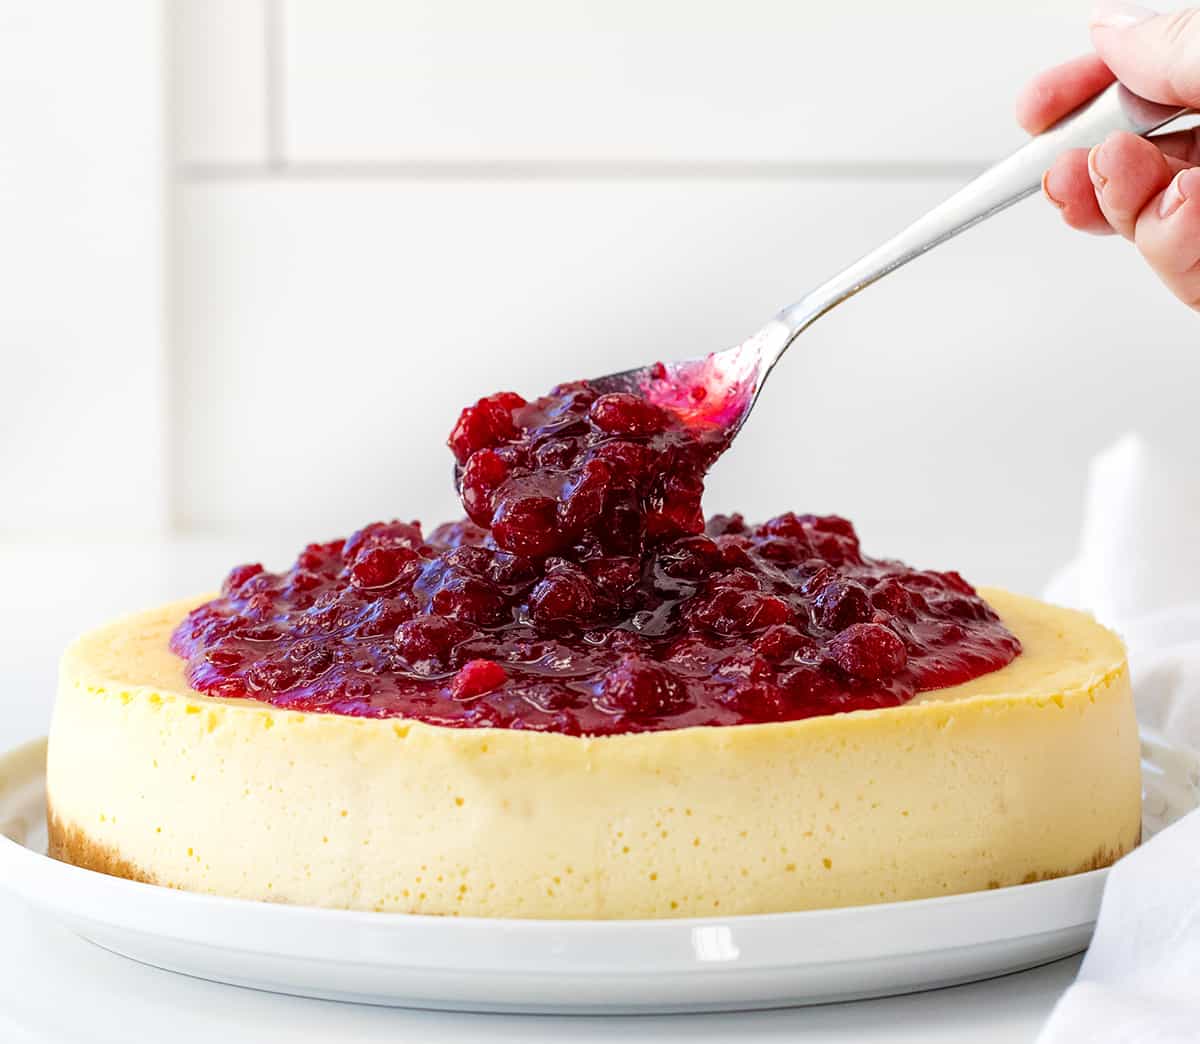 Spooning cranberry sauce over plain cheesecake on a white counter.